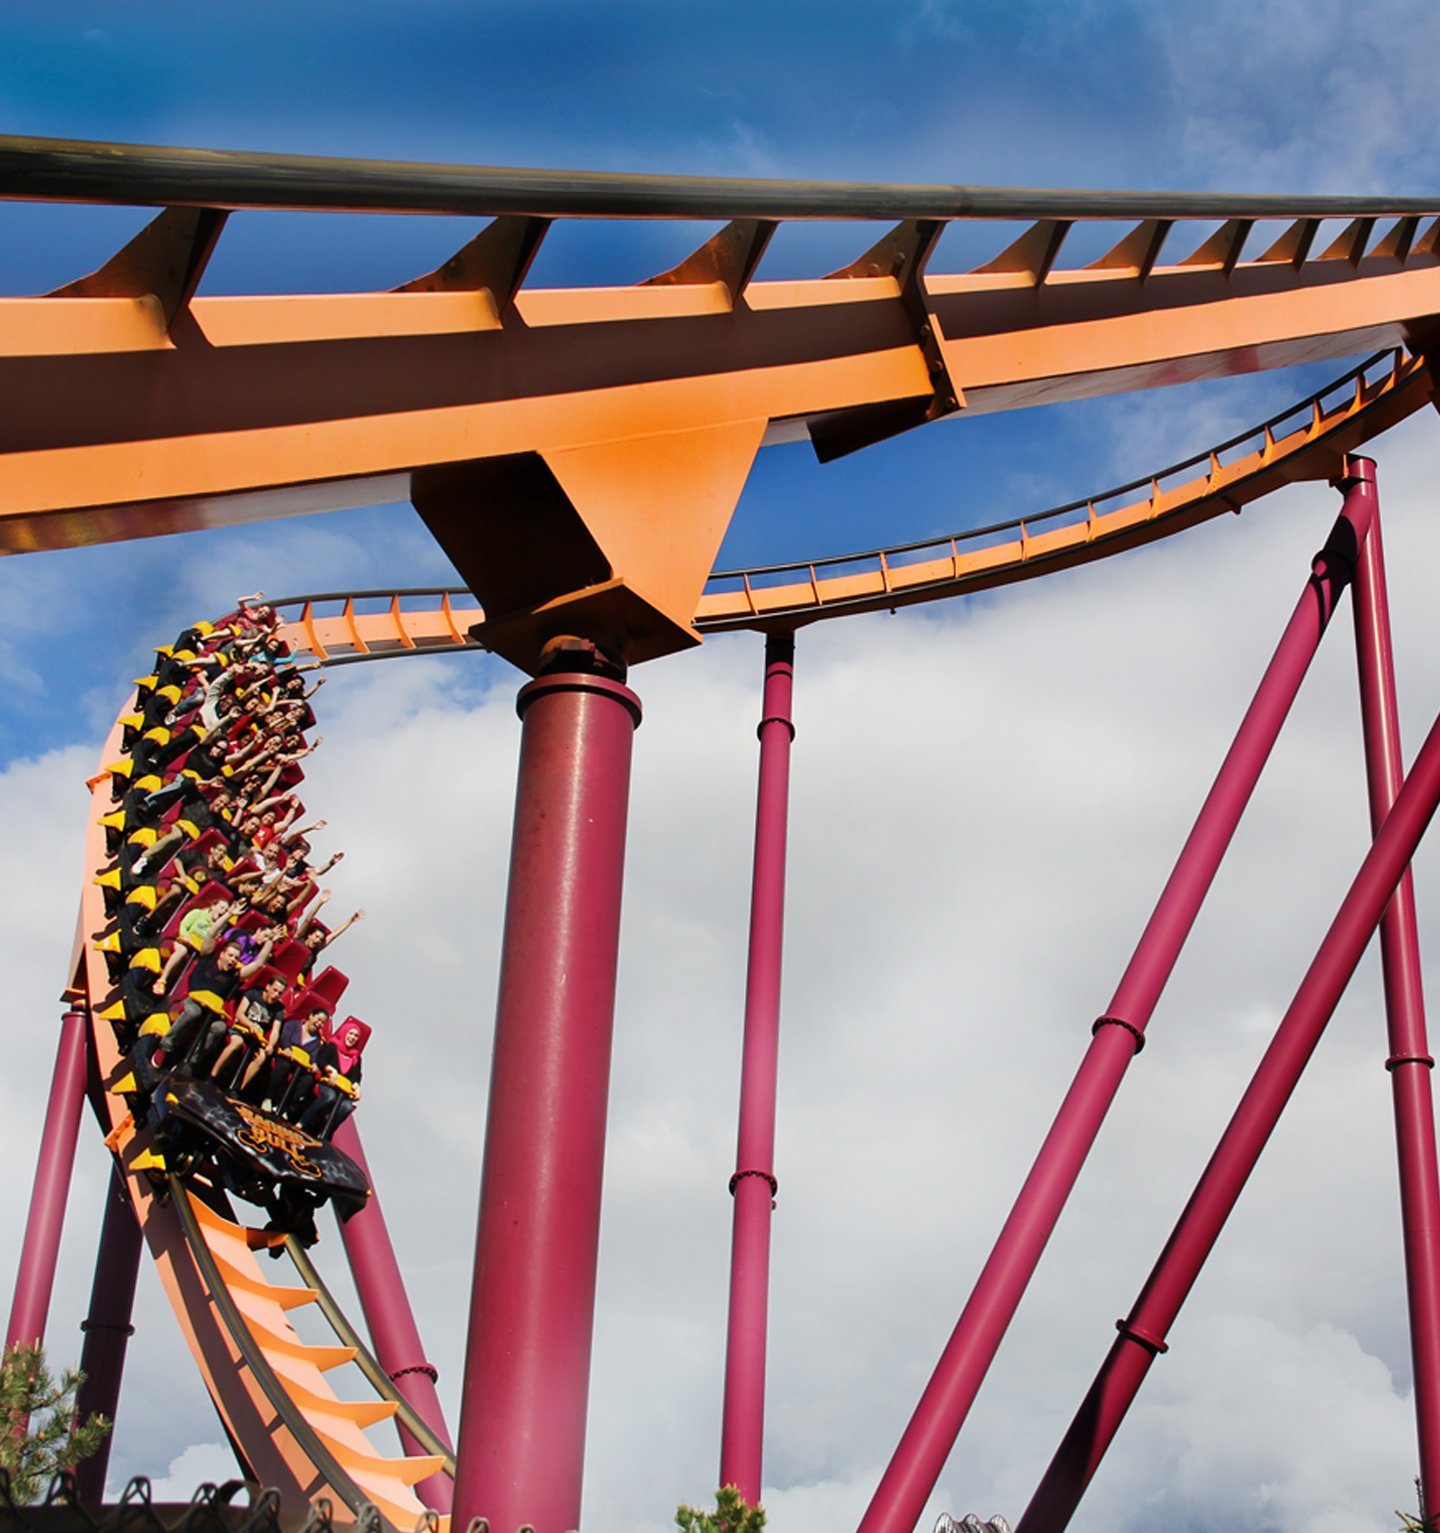 Roller Coasters with Eye-Catching Designs